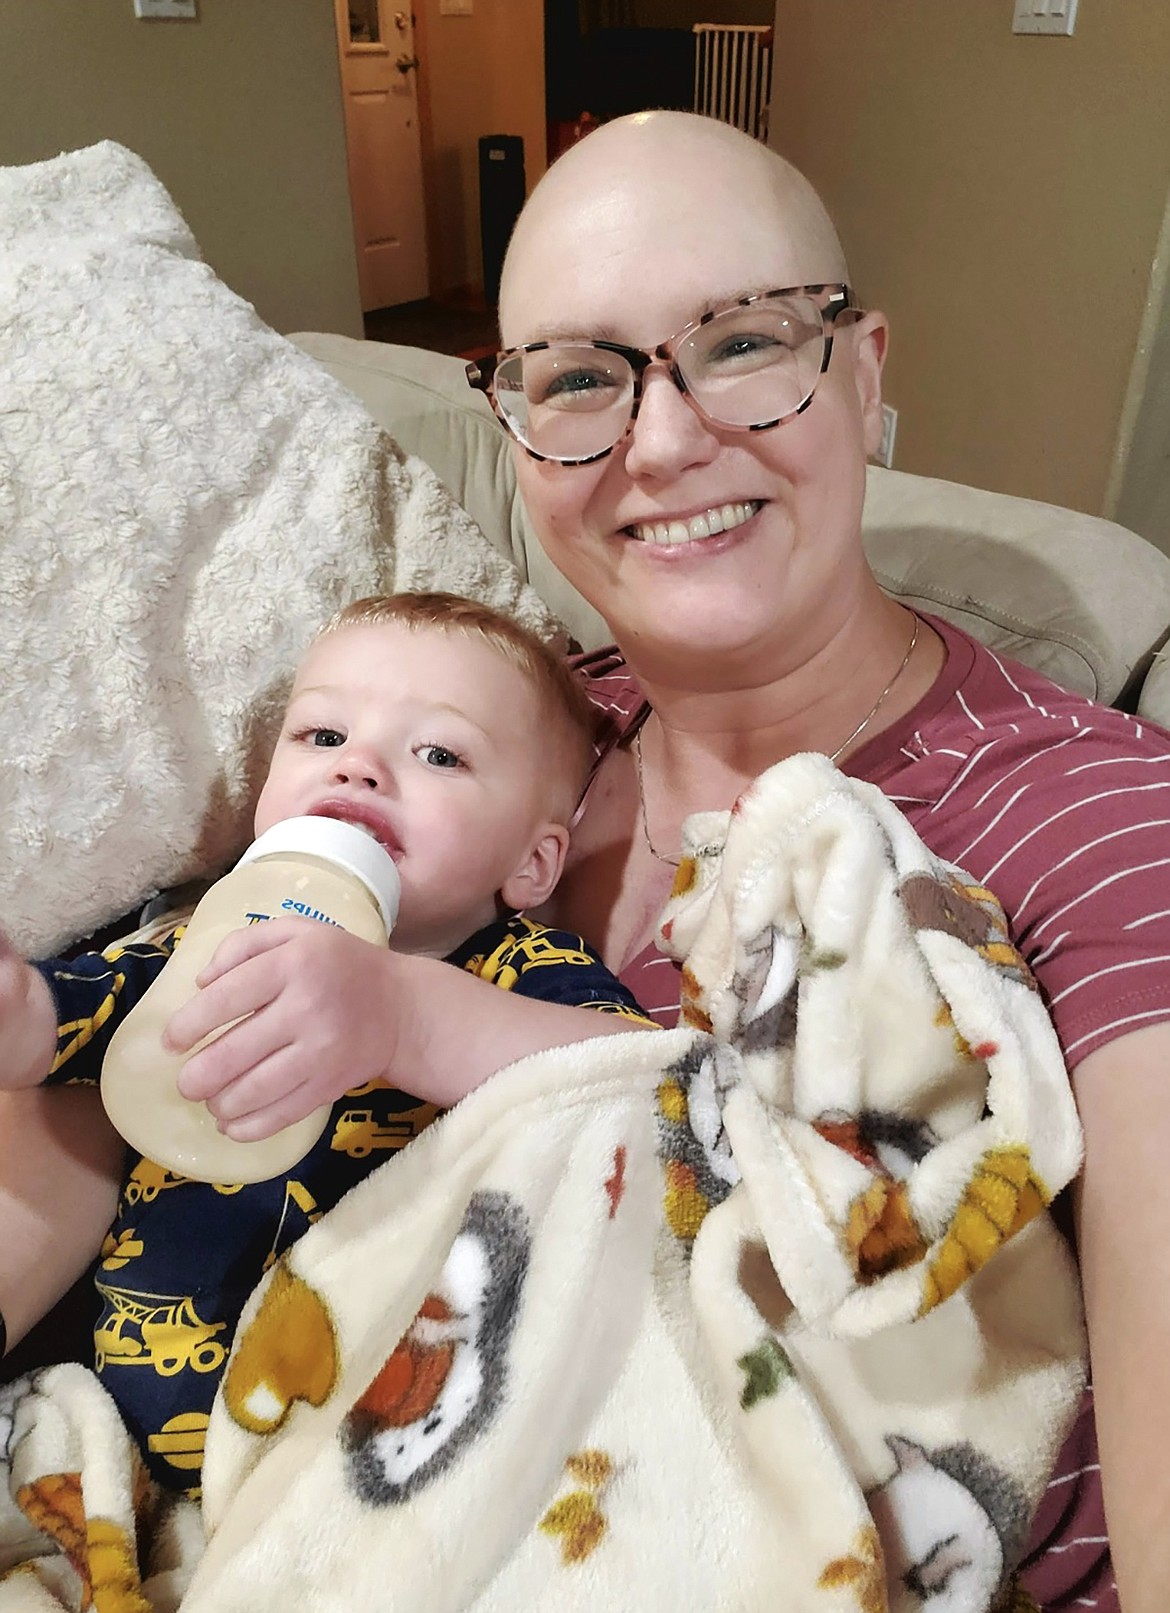 Sandpoint resident Cassie Watters knows all too well that one’s life can be changed in an instant. At the age of 34, she was a young mother to 2-year-old Granger and enjoying life with her precious son. But that changed when she was diagnosed with stage 4 breast cancer.